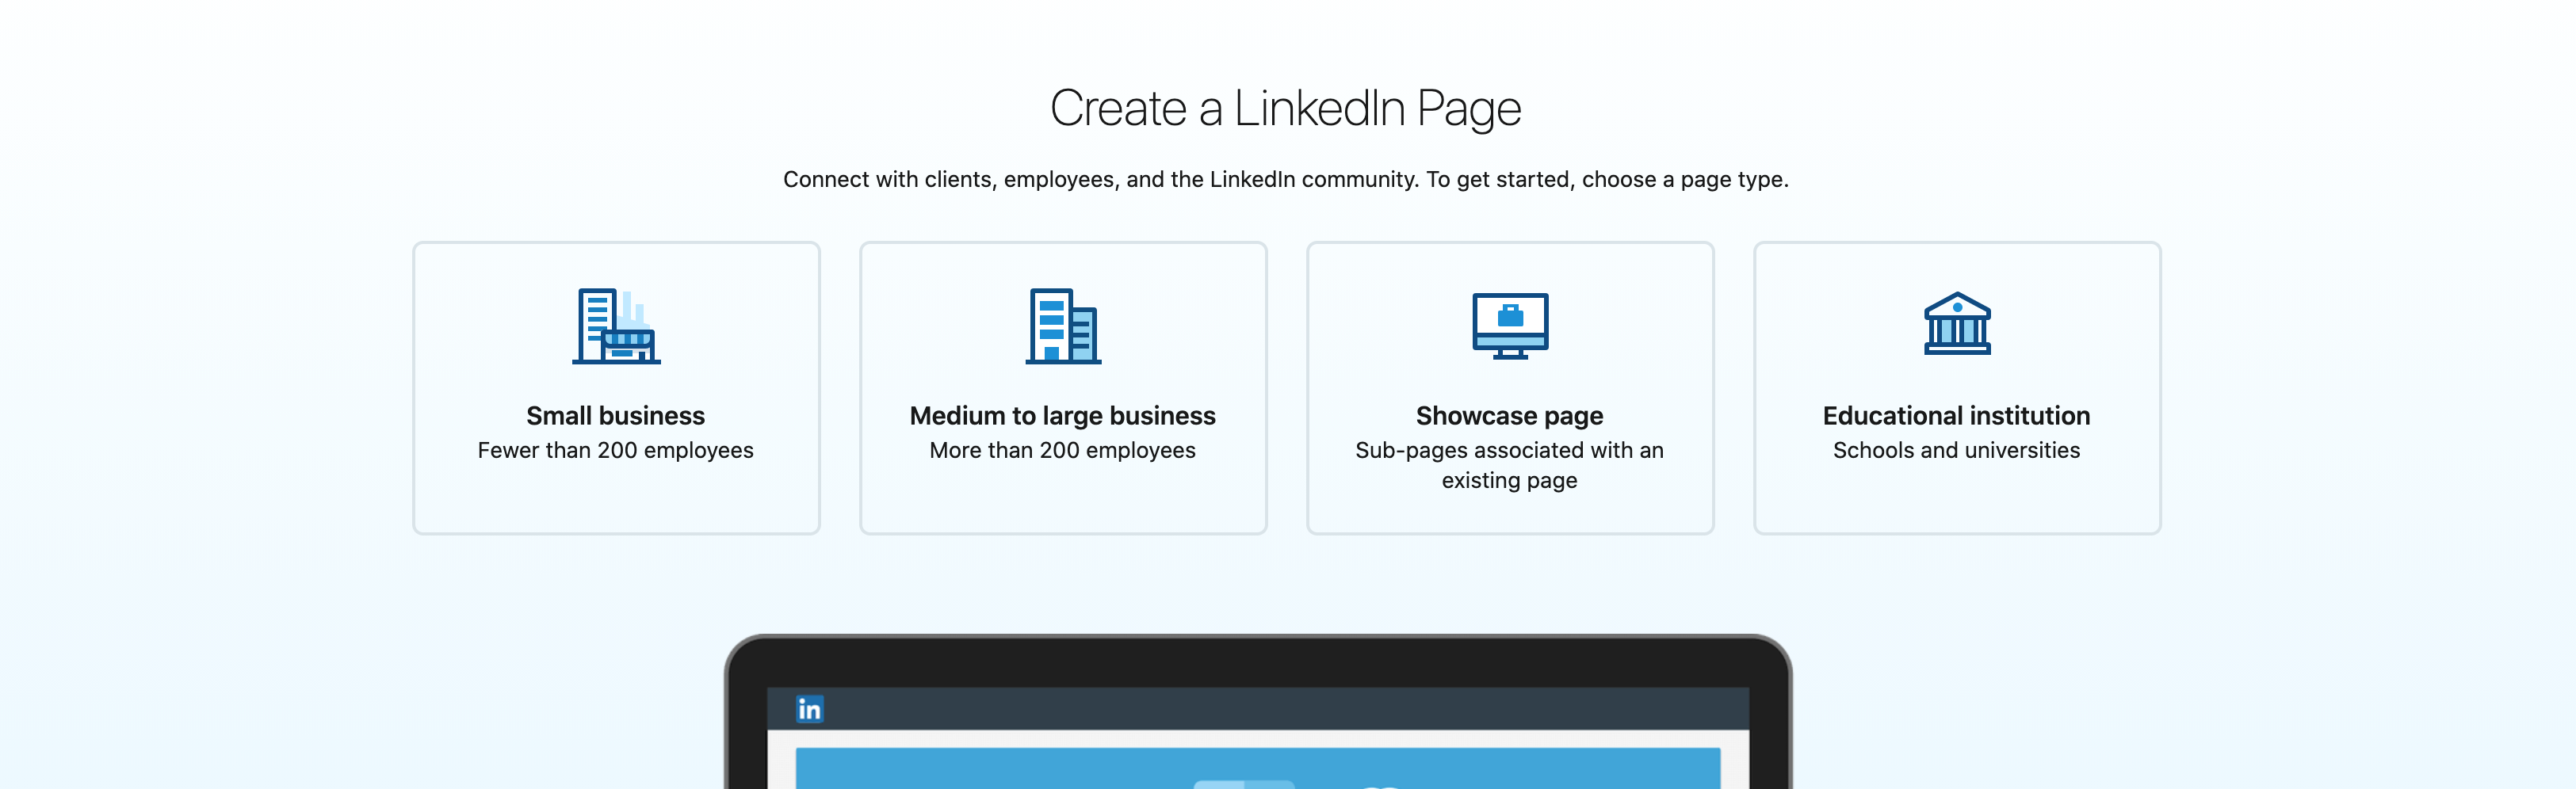 Getting Started with a LinkedIn Company Page